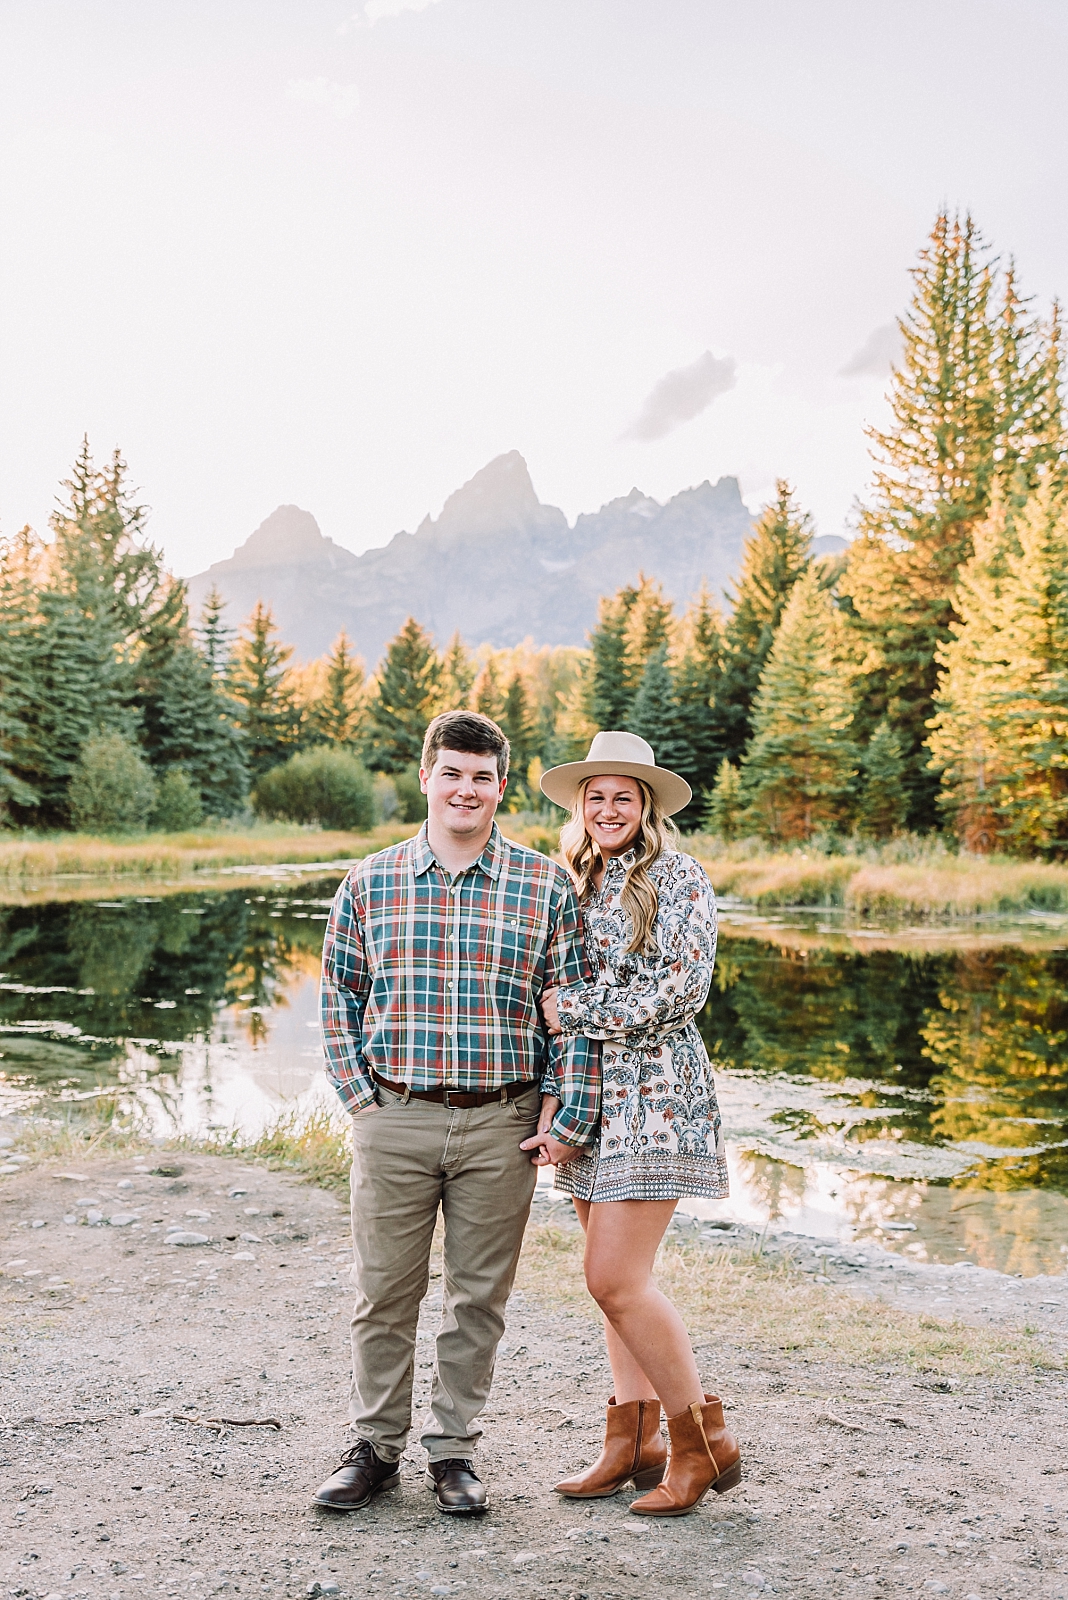 proposal photography at schwabacher's landing